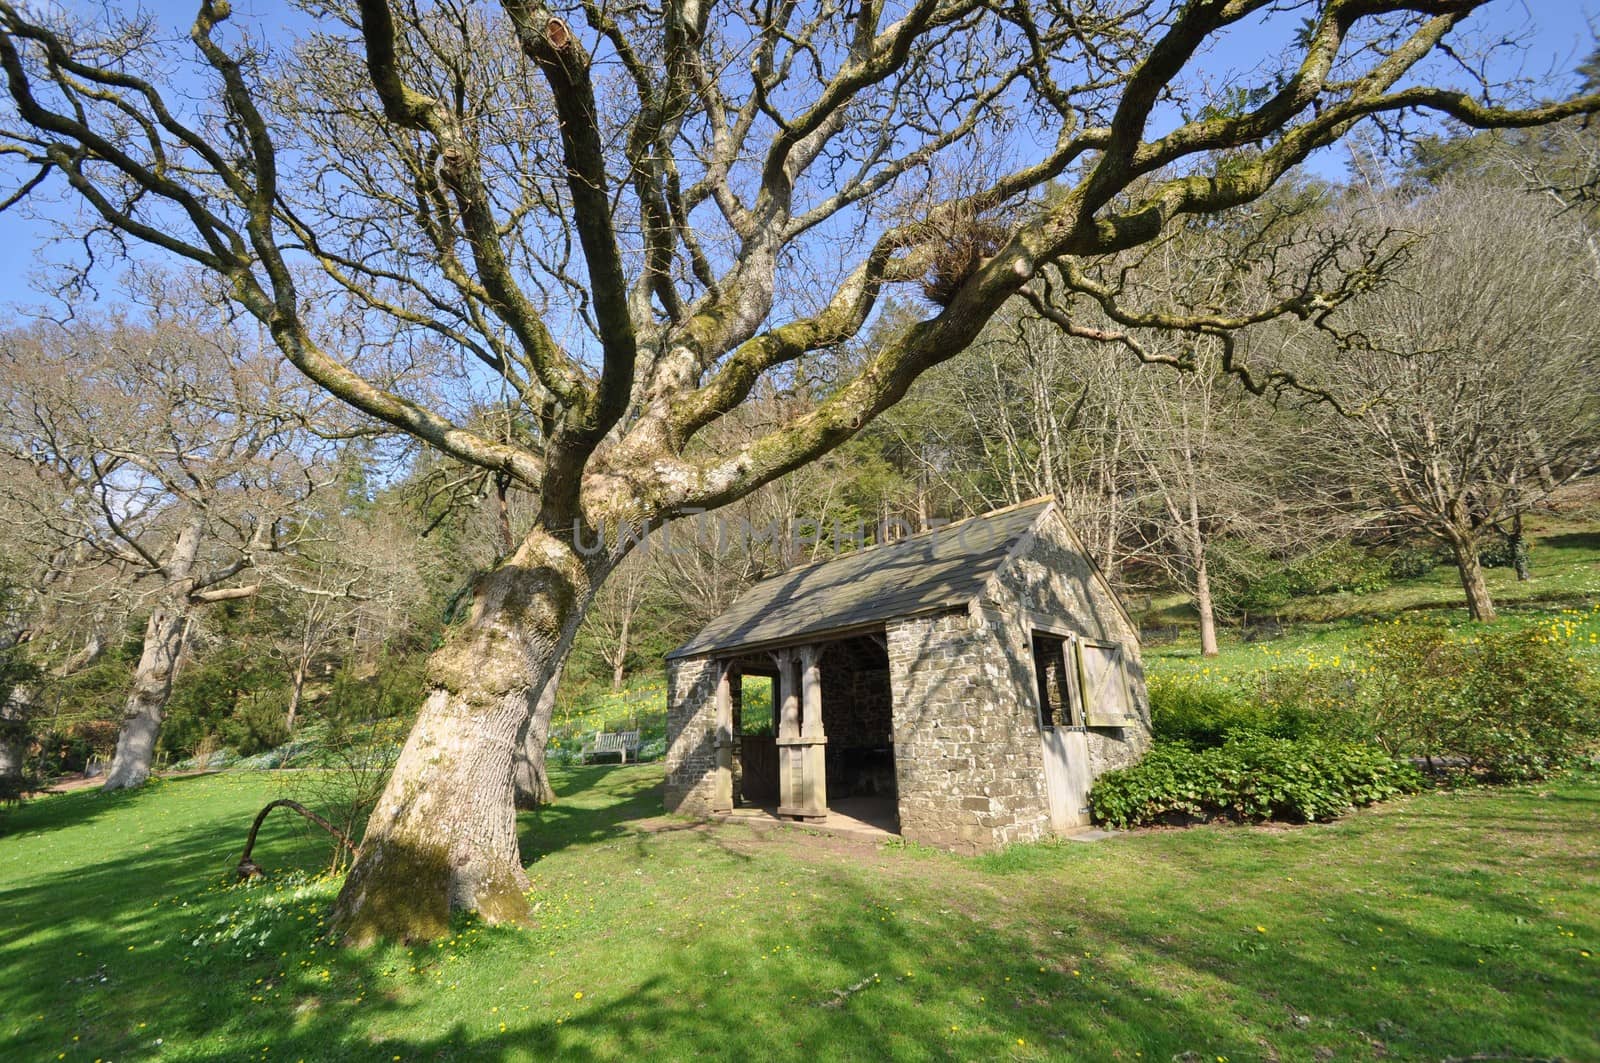 Garden outhouse. Set within a large English country garden in spring.